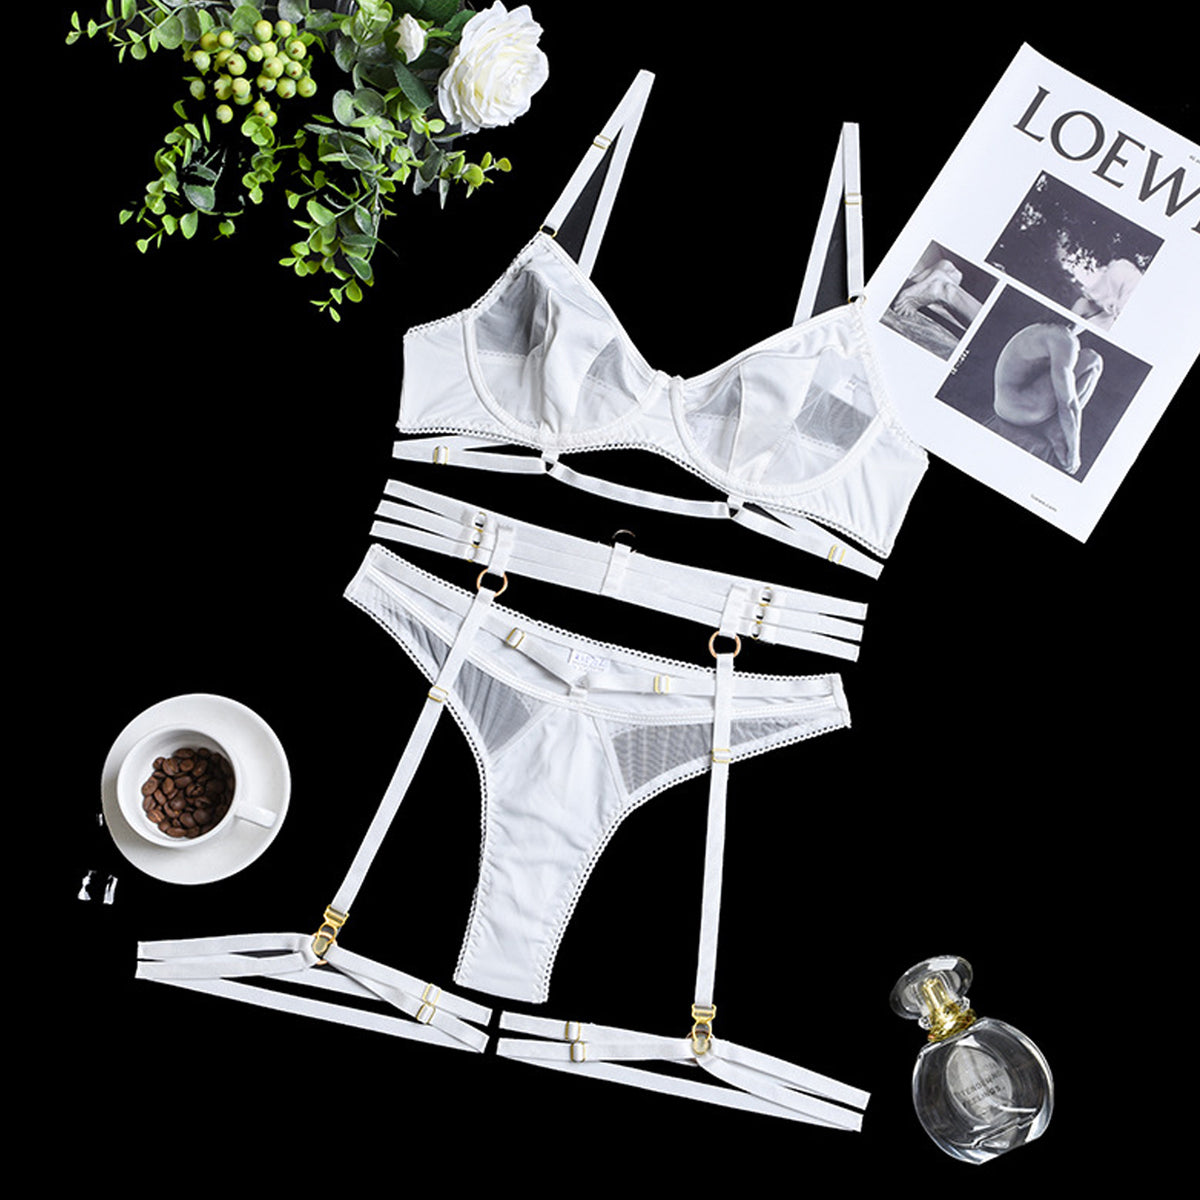 Yomorio Sexy Strappy Lingerie Set - Punk Style Mesh Bra and Panty